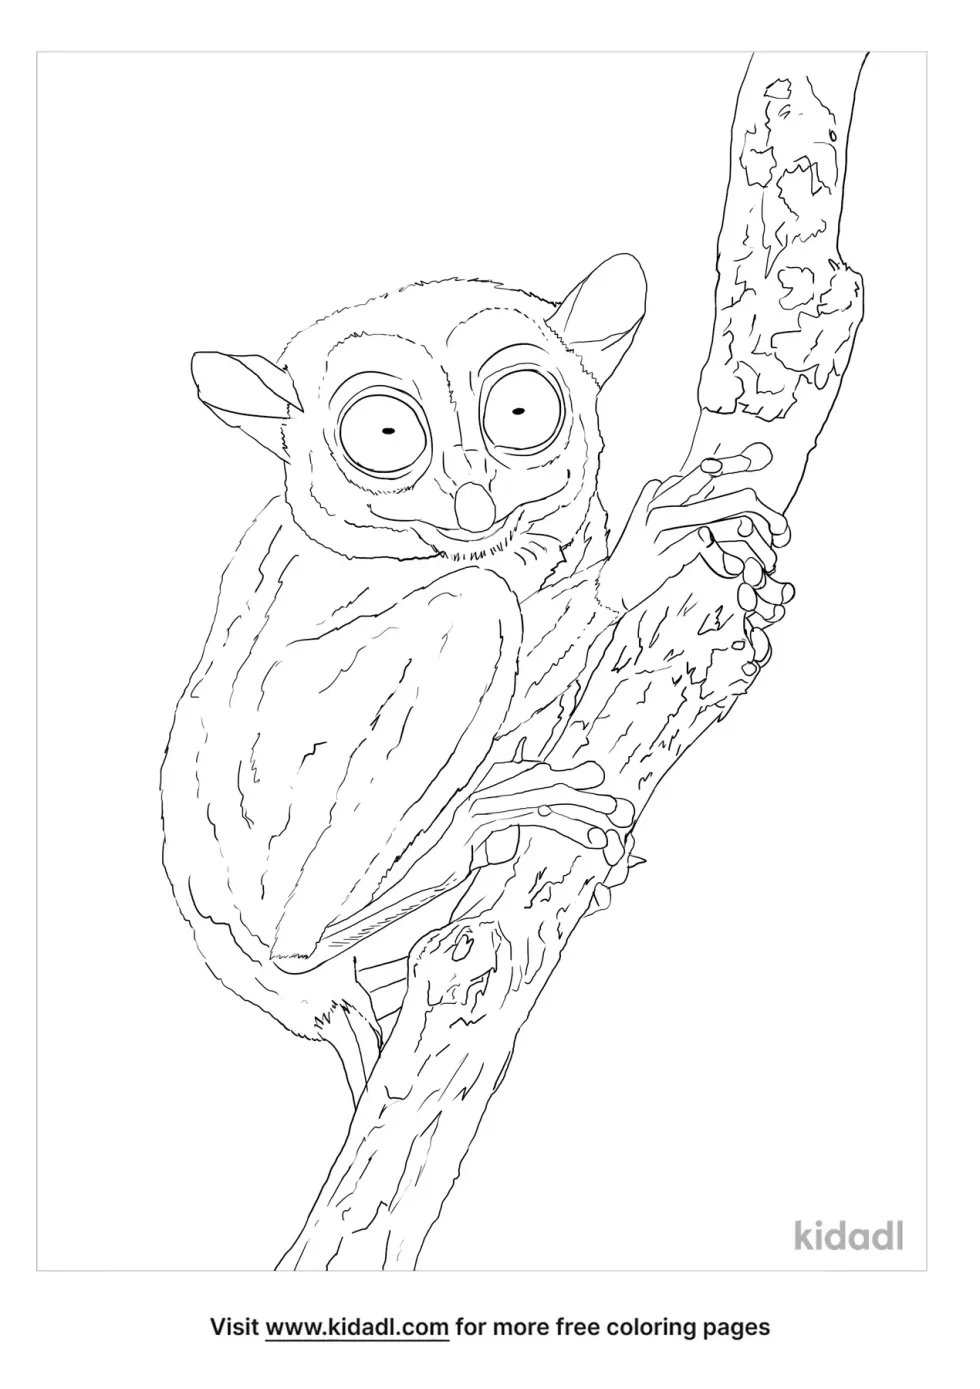 Tarsier Coloring Page